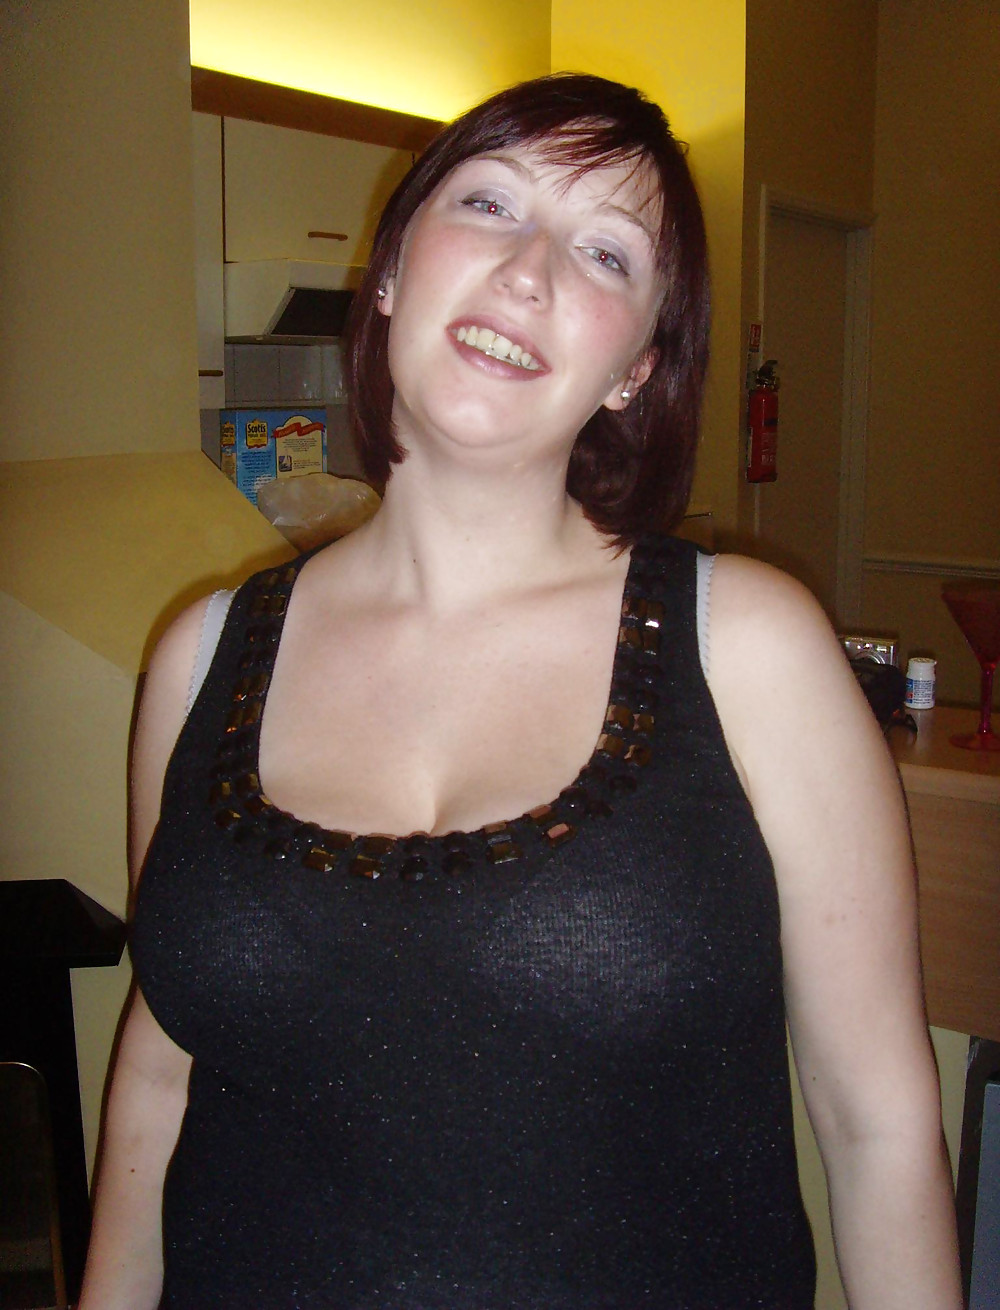 Laura from Scotland, great tits! pict gal